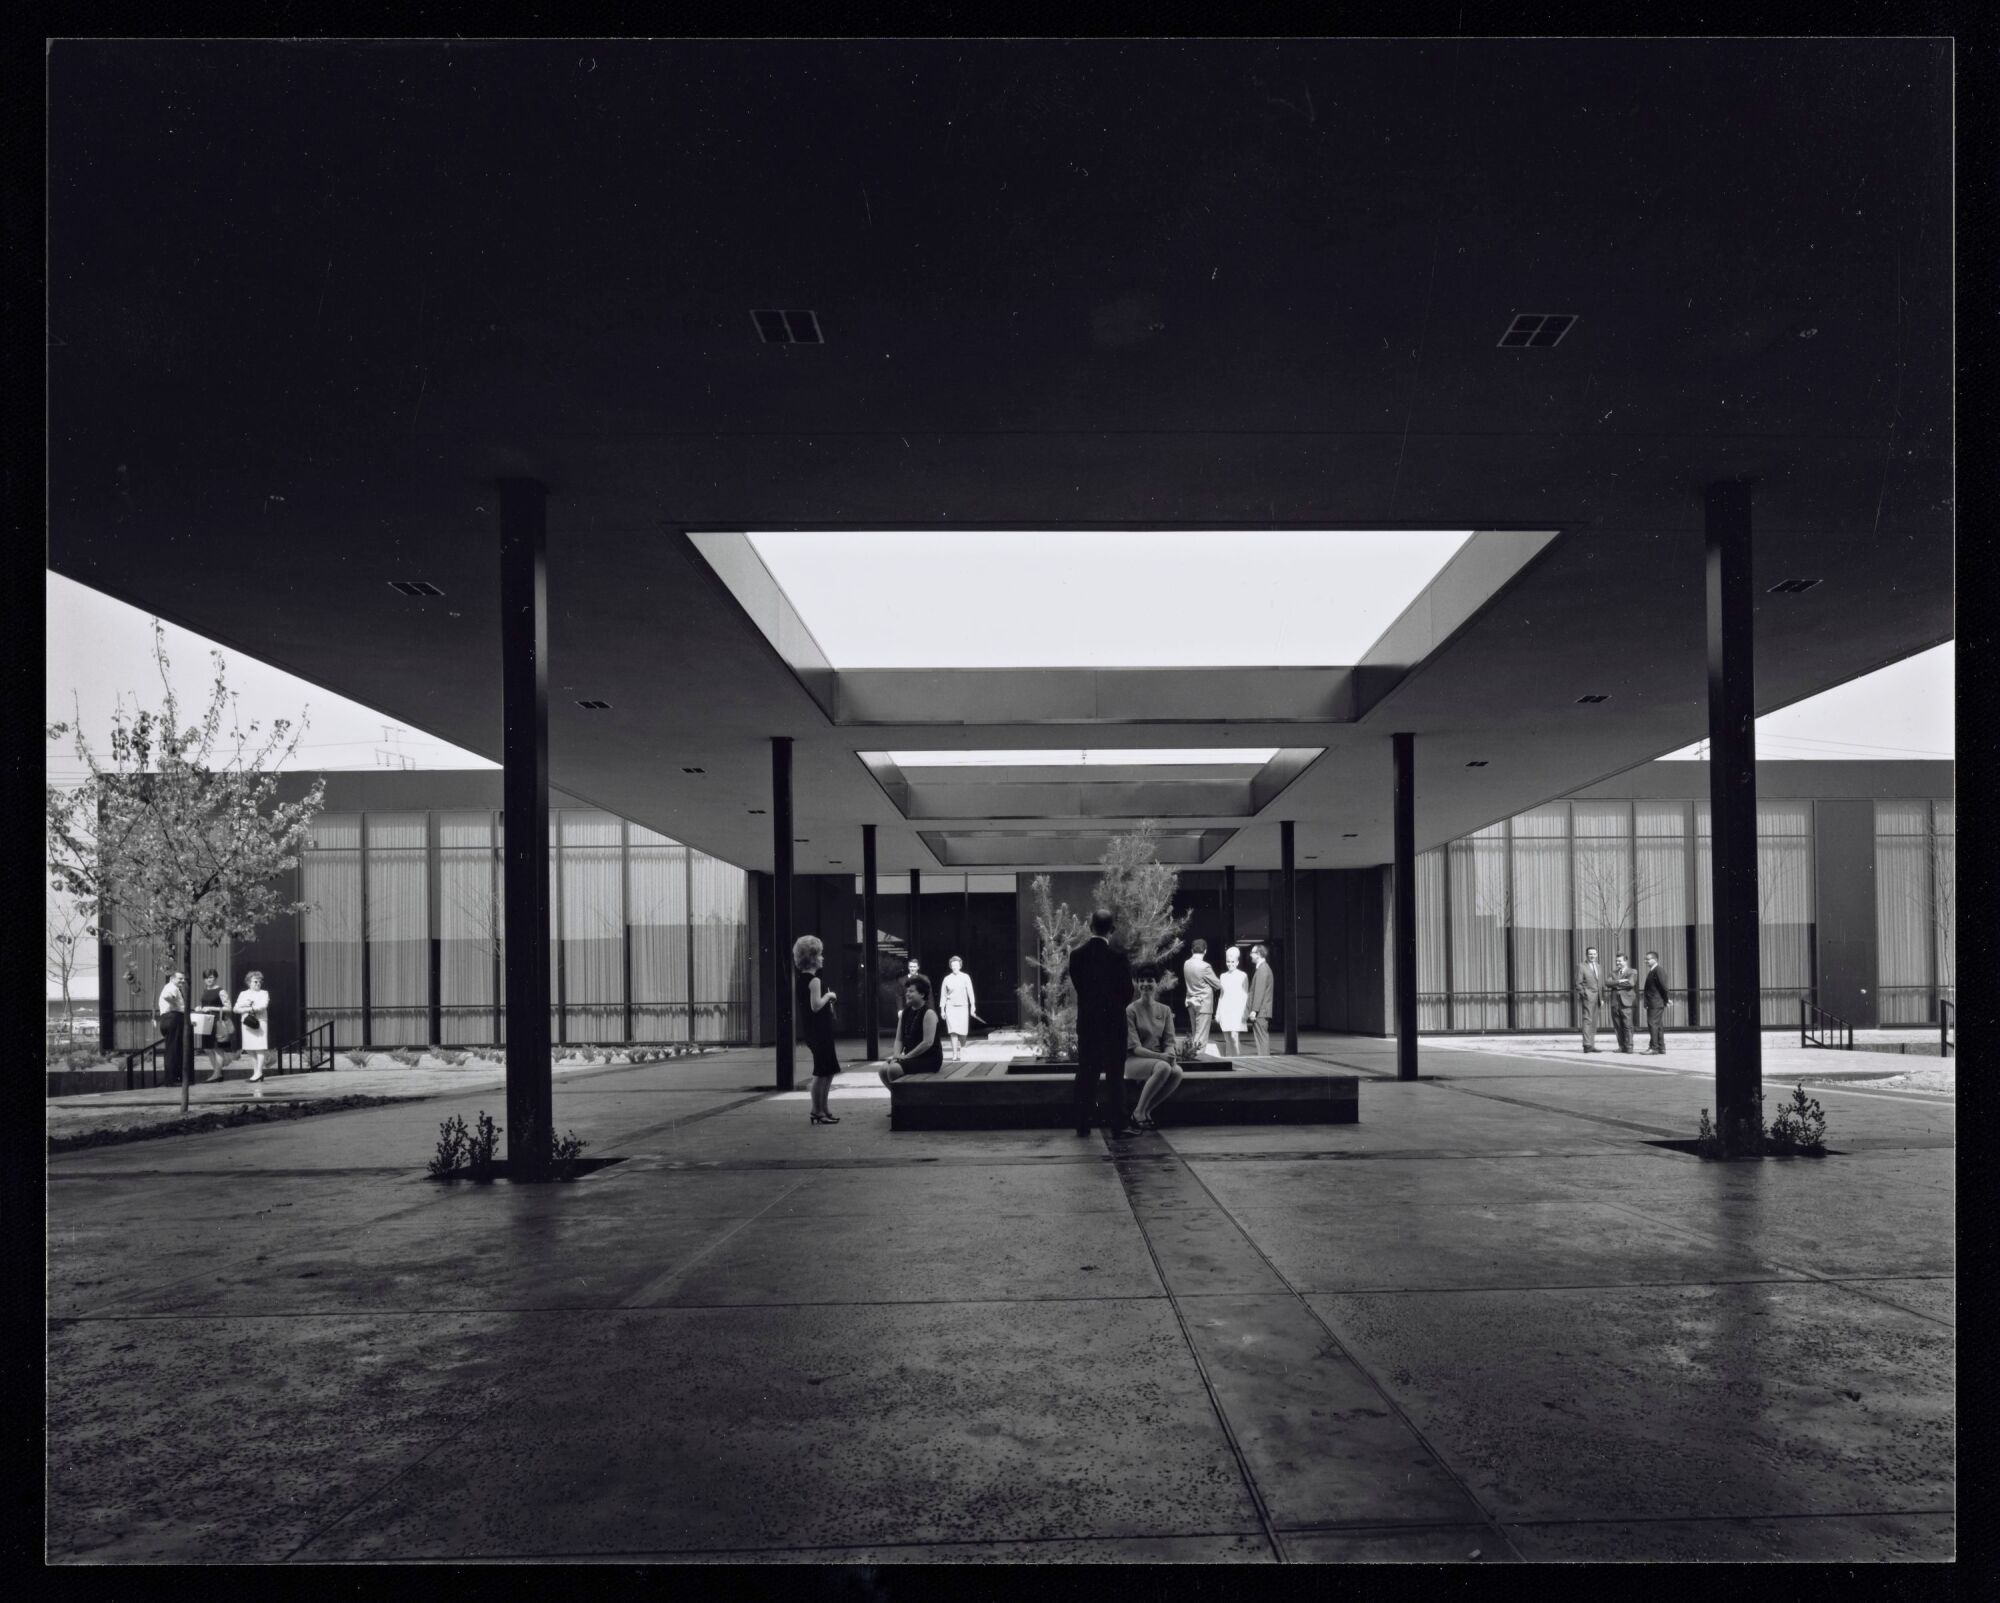 A vintage black and white image shows a covered breezeway with skylight cut out between two buildings